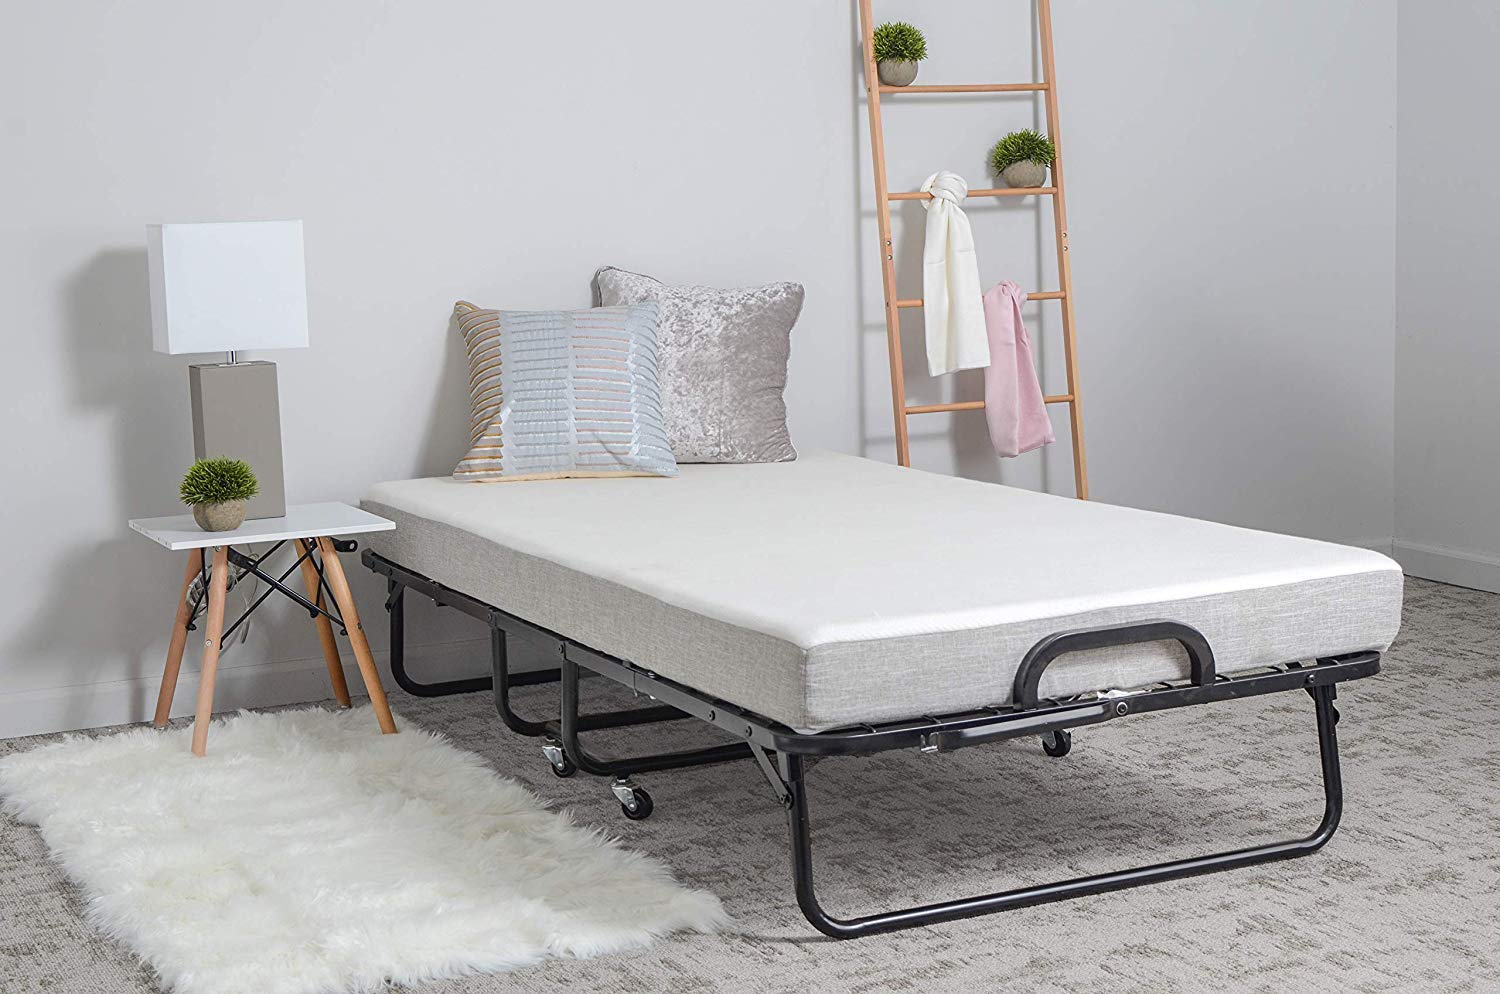 Top 10 Best Folding Bed Frame in 2023 Reviews | Buyer Guide